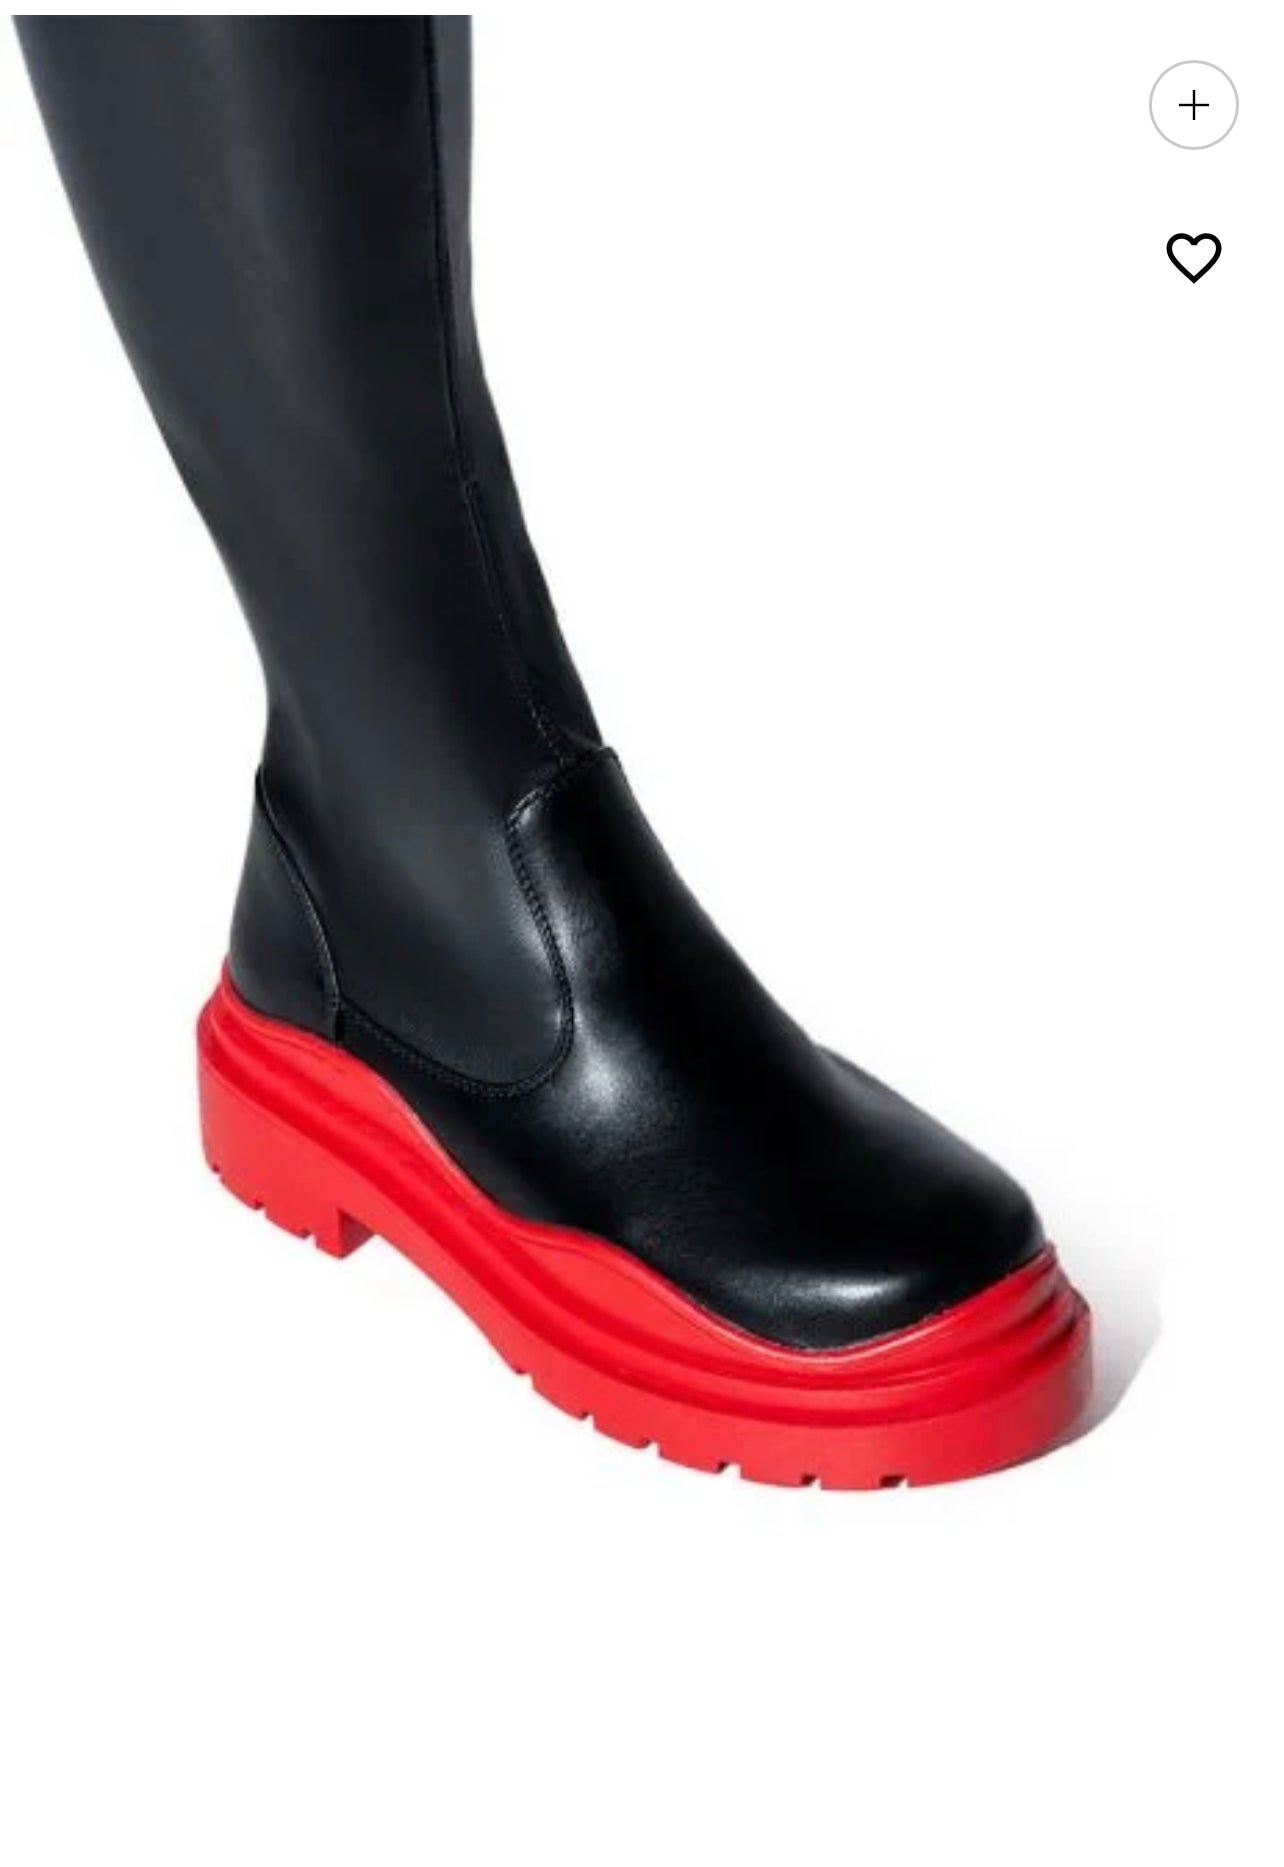 You Got To Love It Thigh High Stretch Platform Black And Red Boot